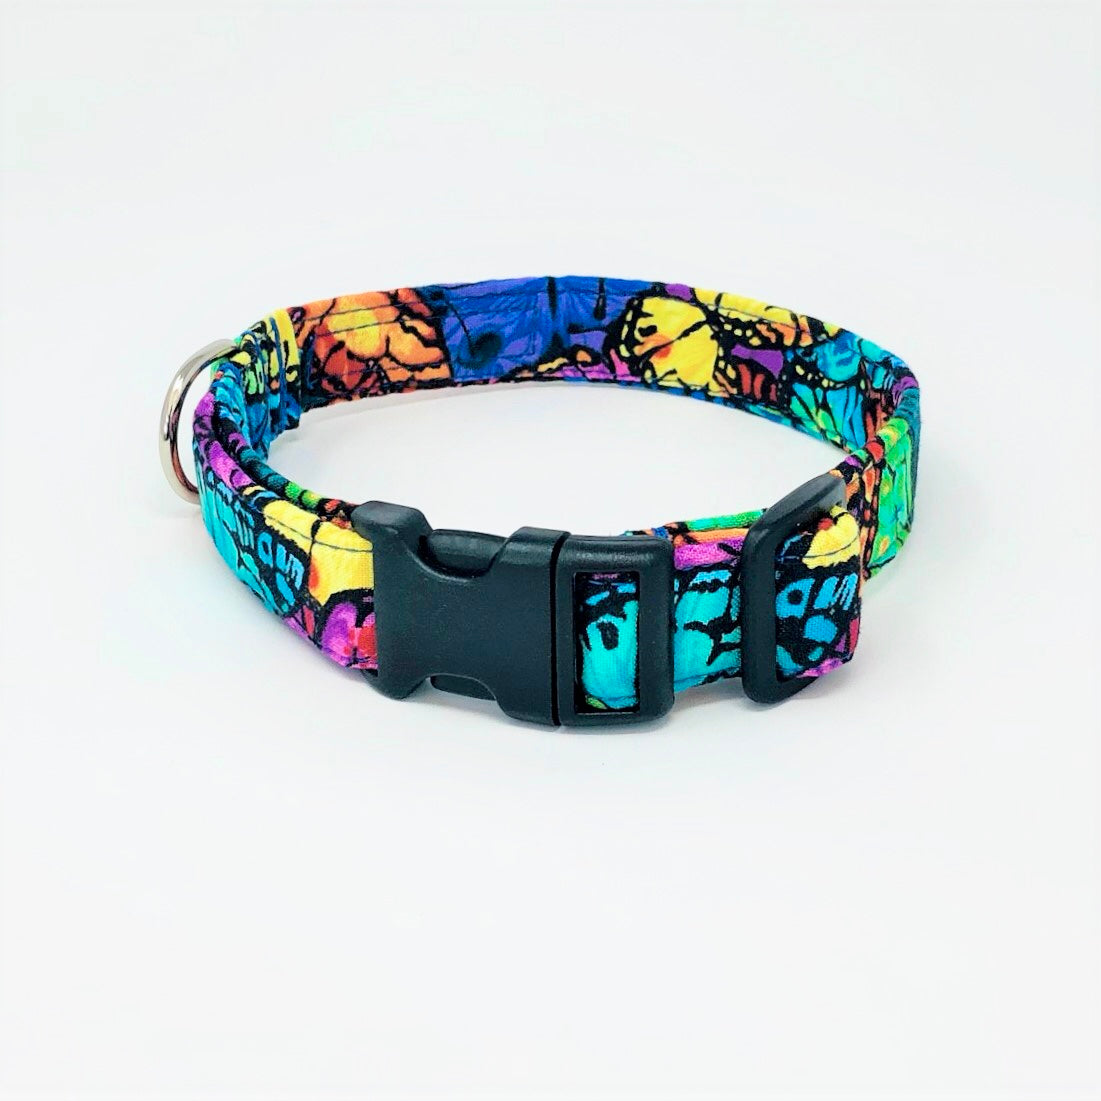 Handcrafted dog collar by wiff waff designs in a vibrant colourful butterfly print with shades of blue, orange, yellow, turquoise, pink, red and purple. Black triglide and clip plus shiny chrome d ring.